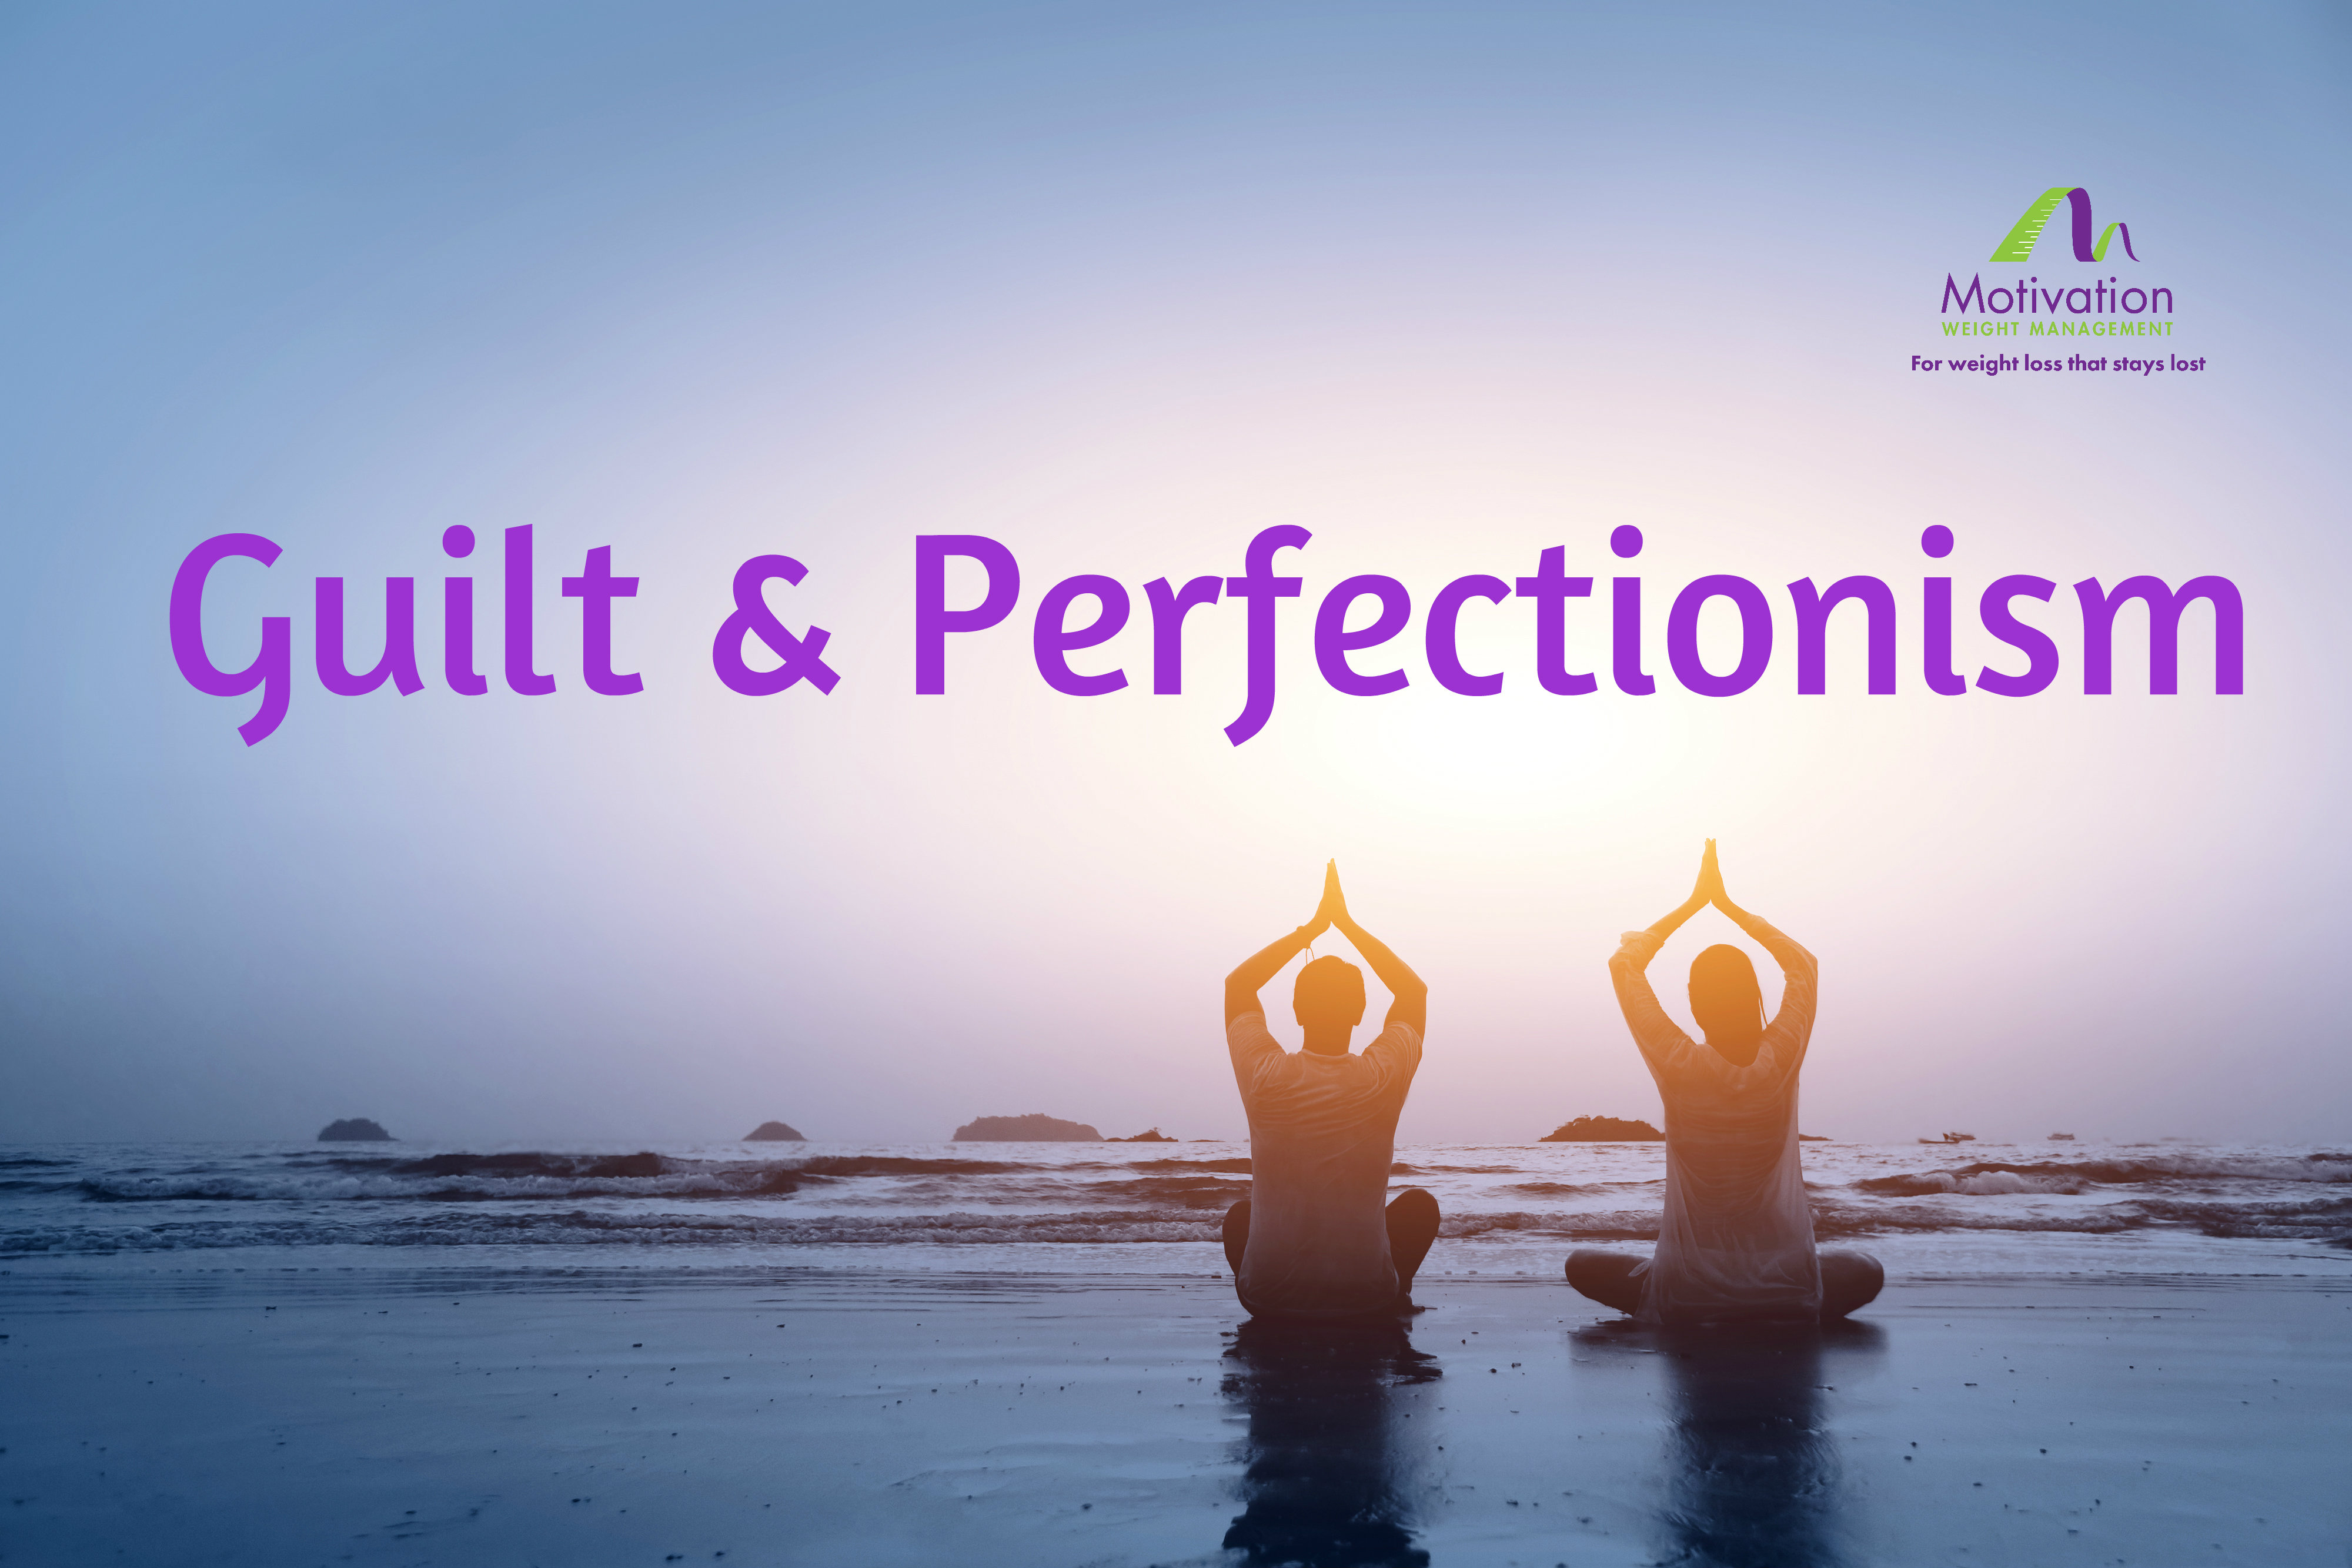 Day 1 Guilt & Perfectionism